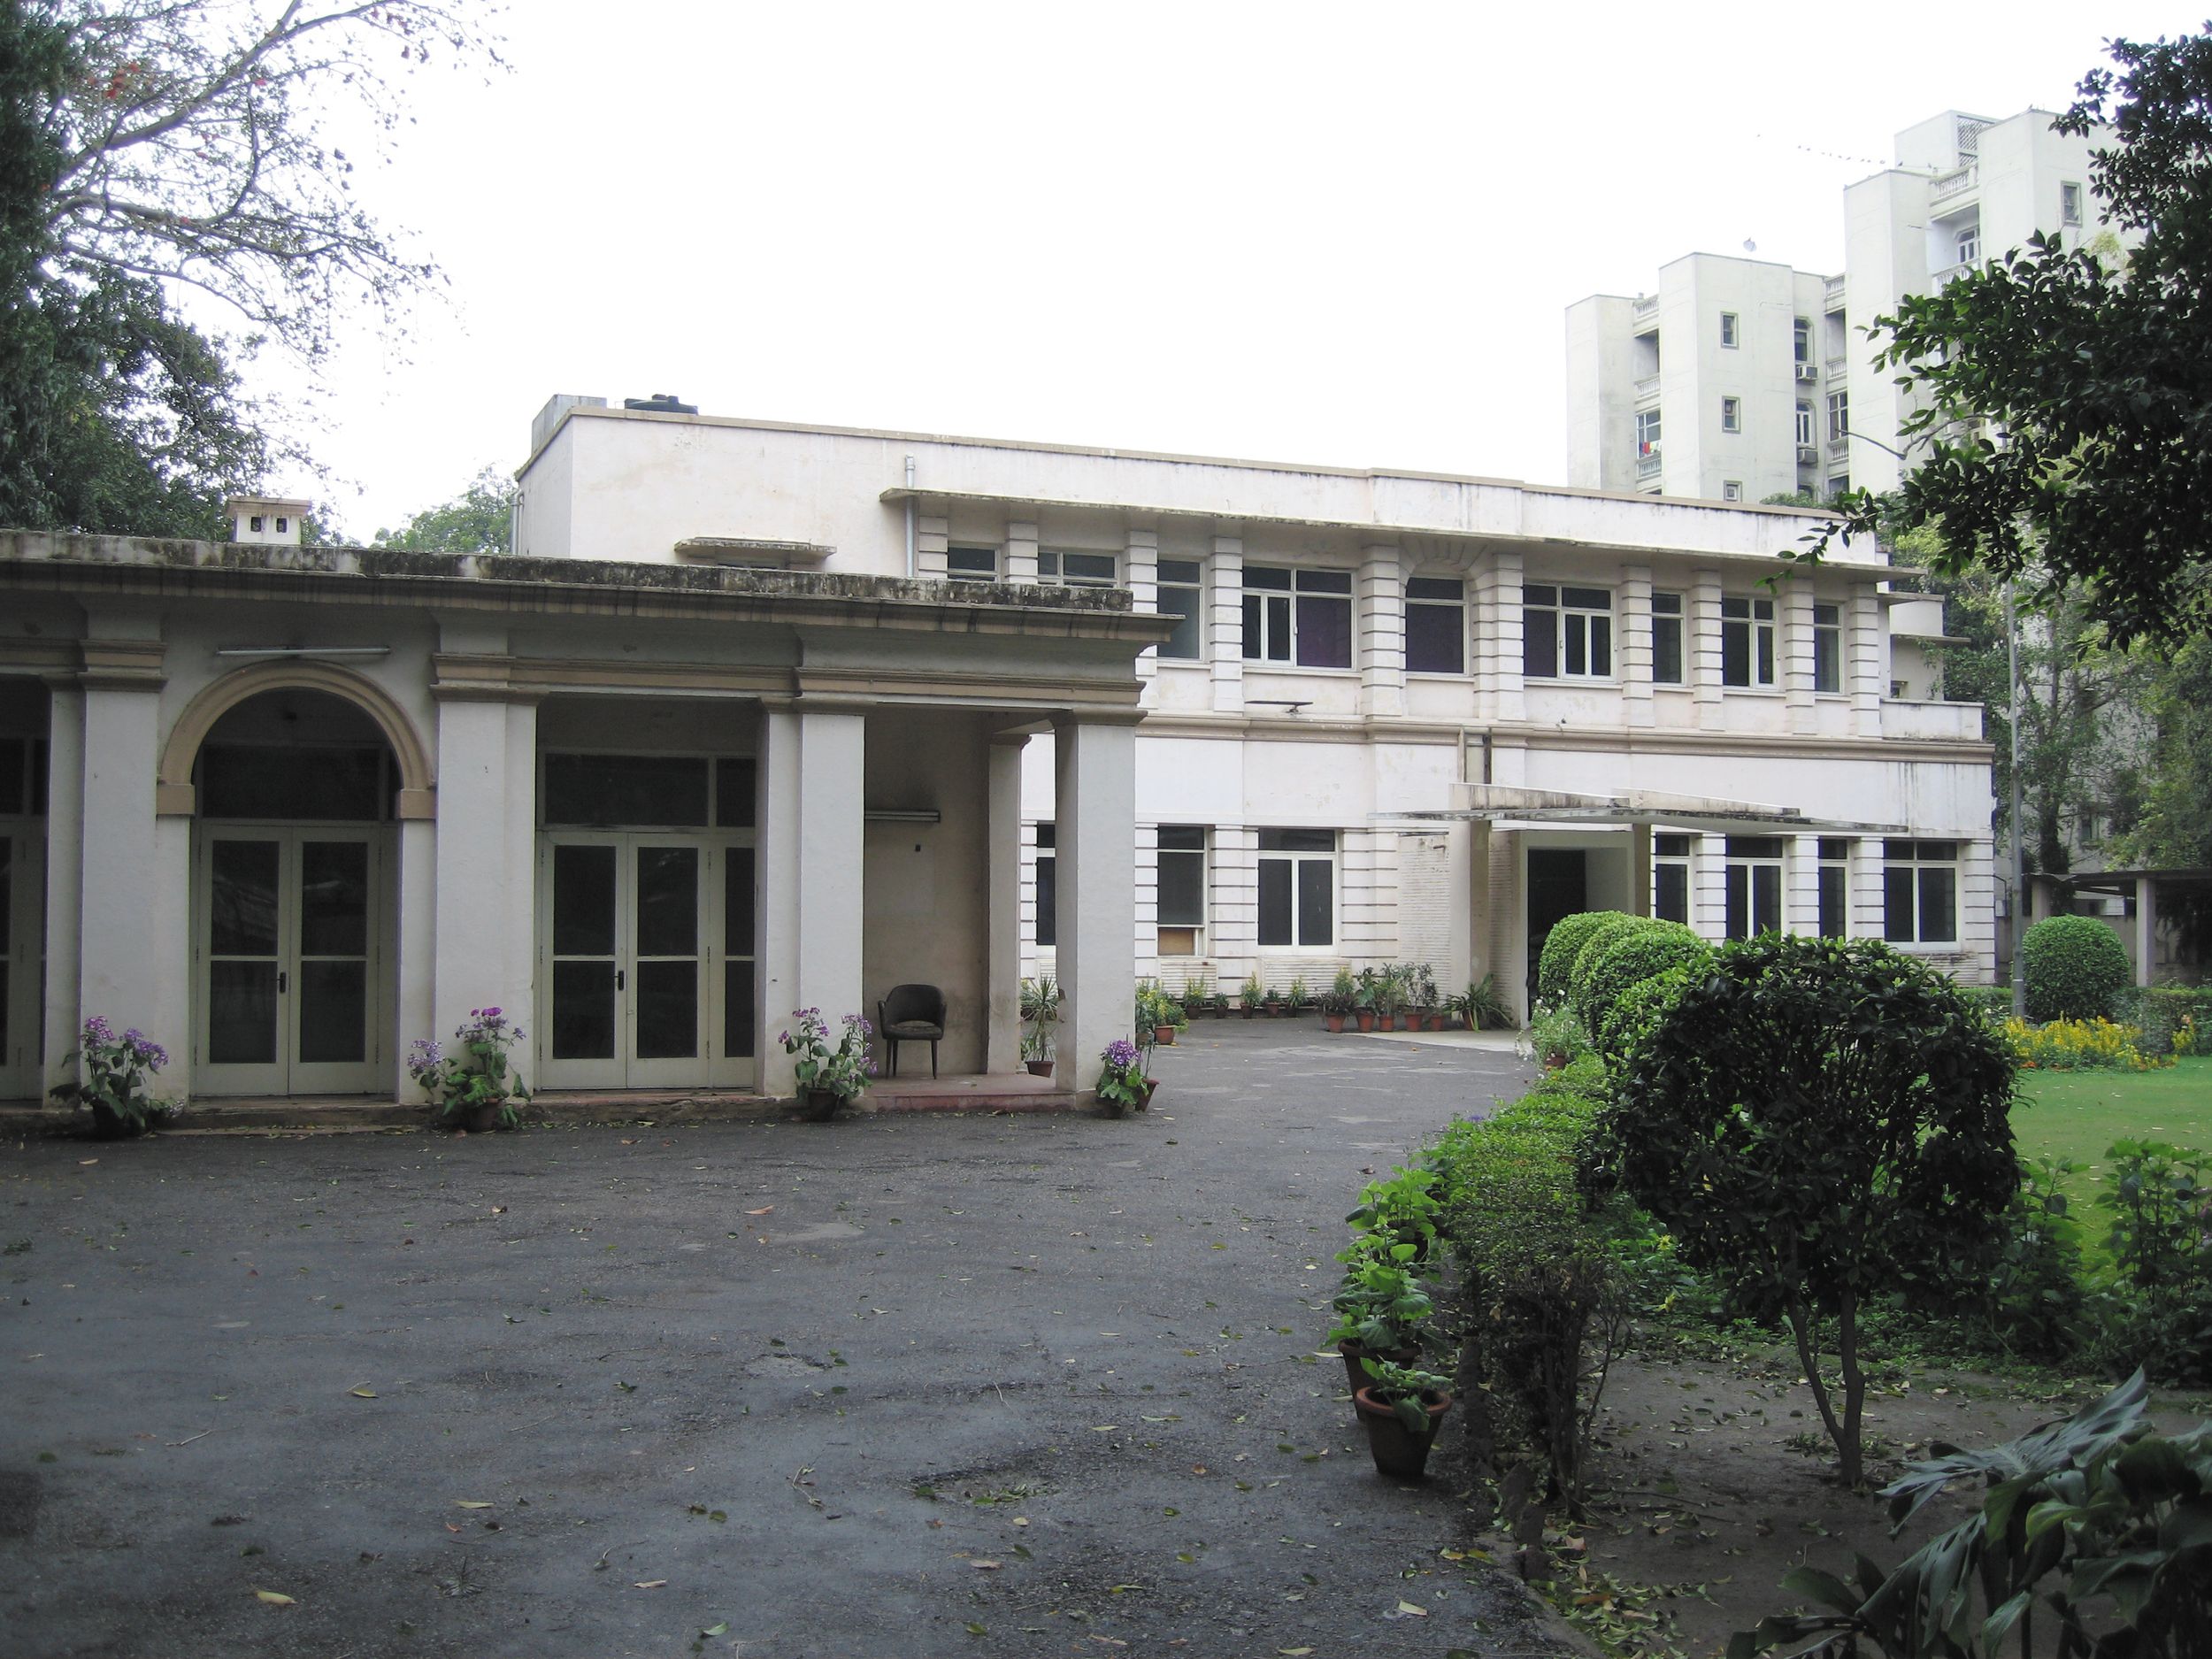 The house in New Delhi where the OSS Morale Operations team produced "disinformation" still stands today. Often, the goal of the team was to demoralize the Japanese troops opposing the Allies in the CBI.